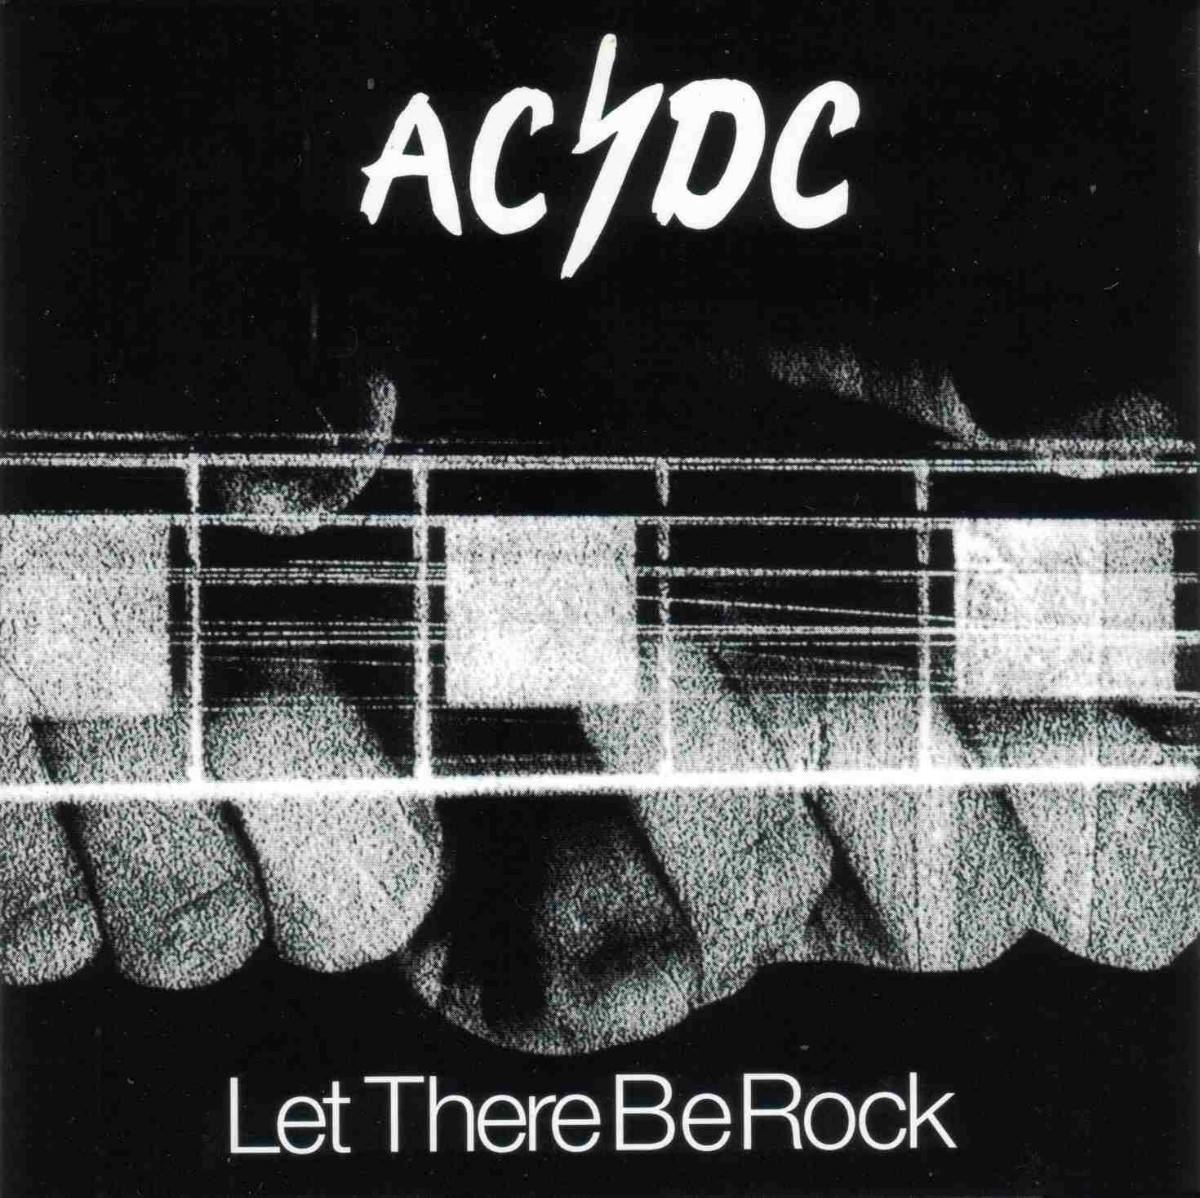 AC/DC Capa Let There Be Rock Australiano 1977